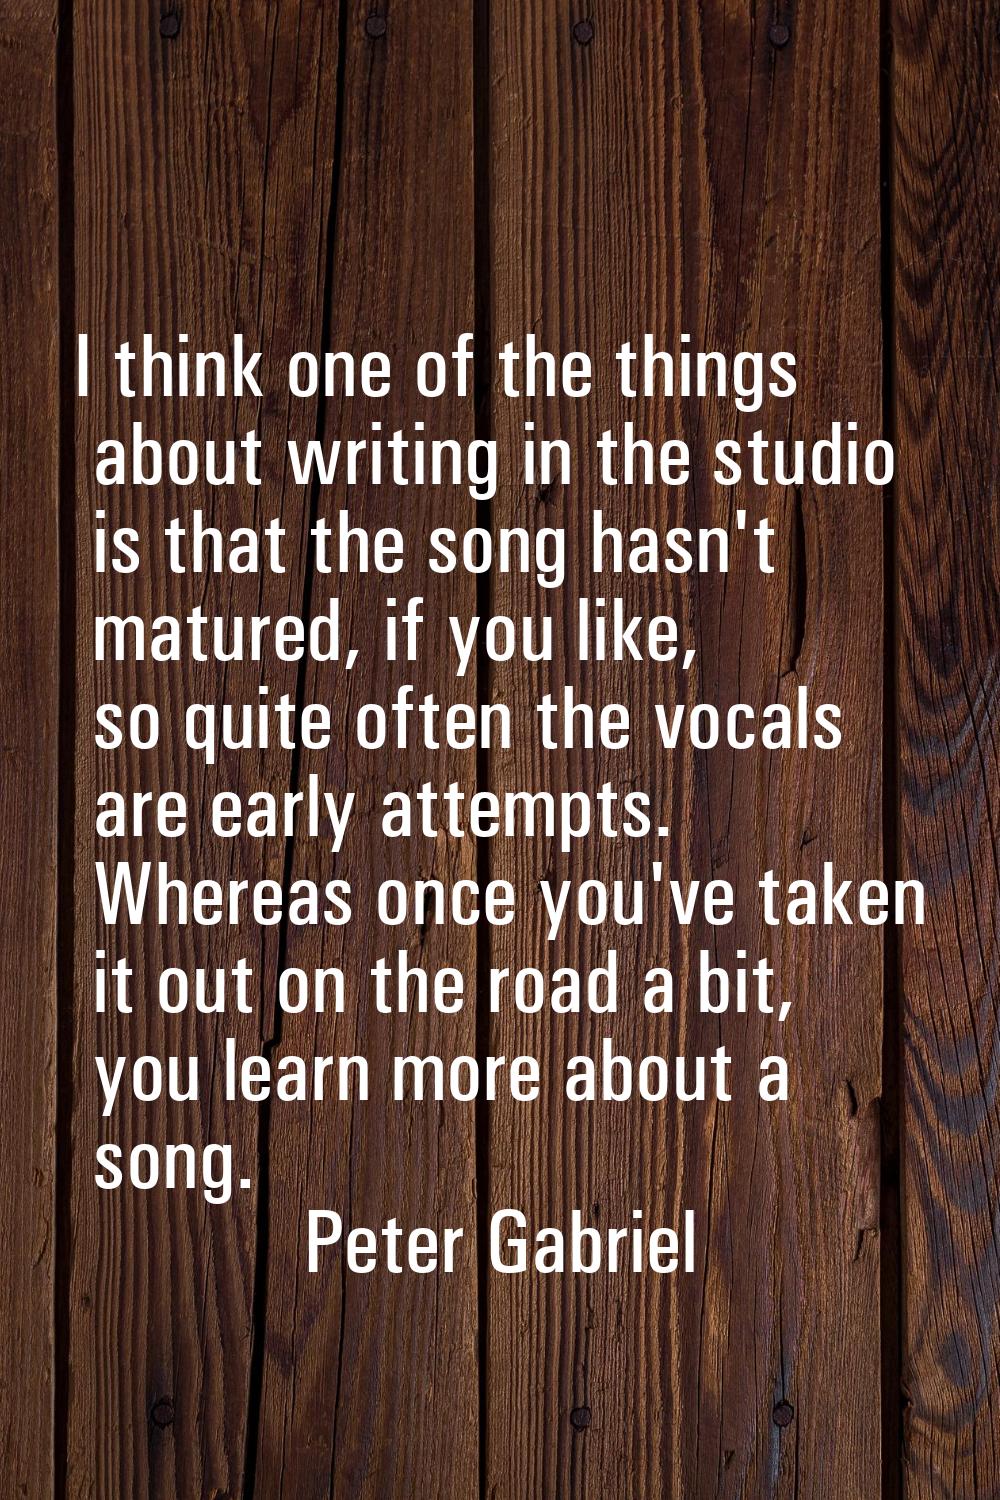 I think one of the things about writing in the studio is that the song hasn't matured, if you like,